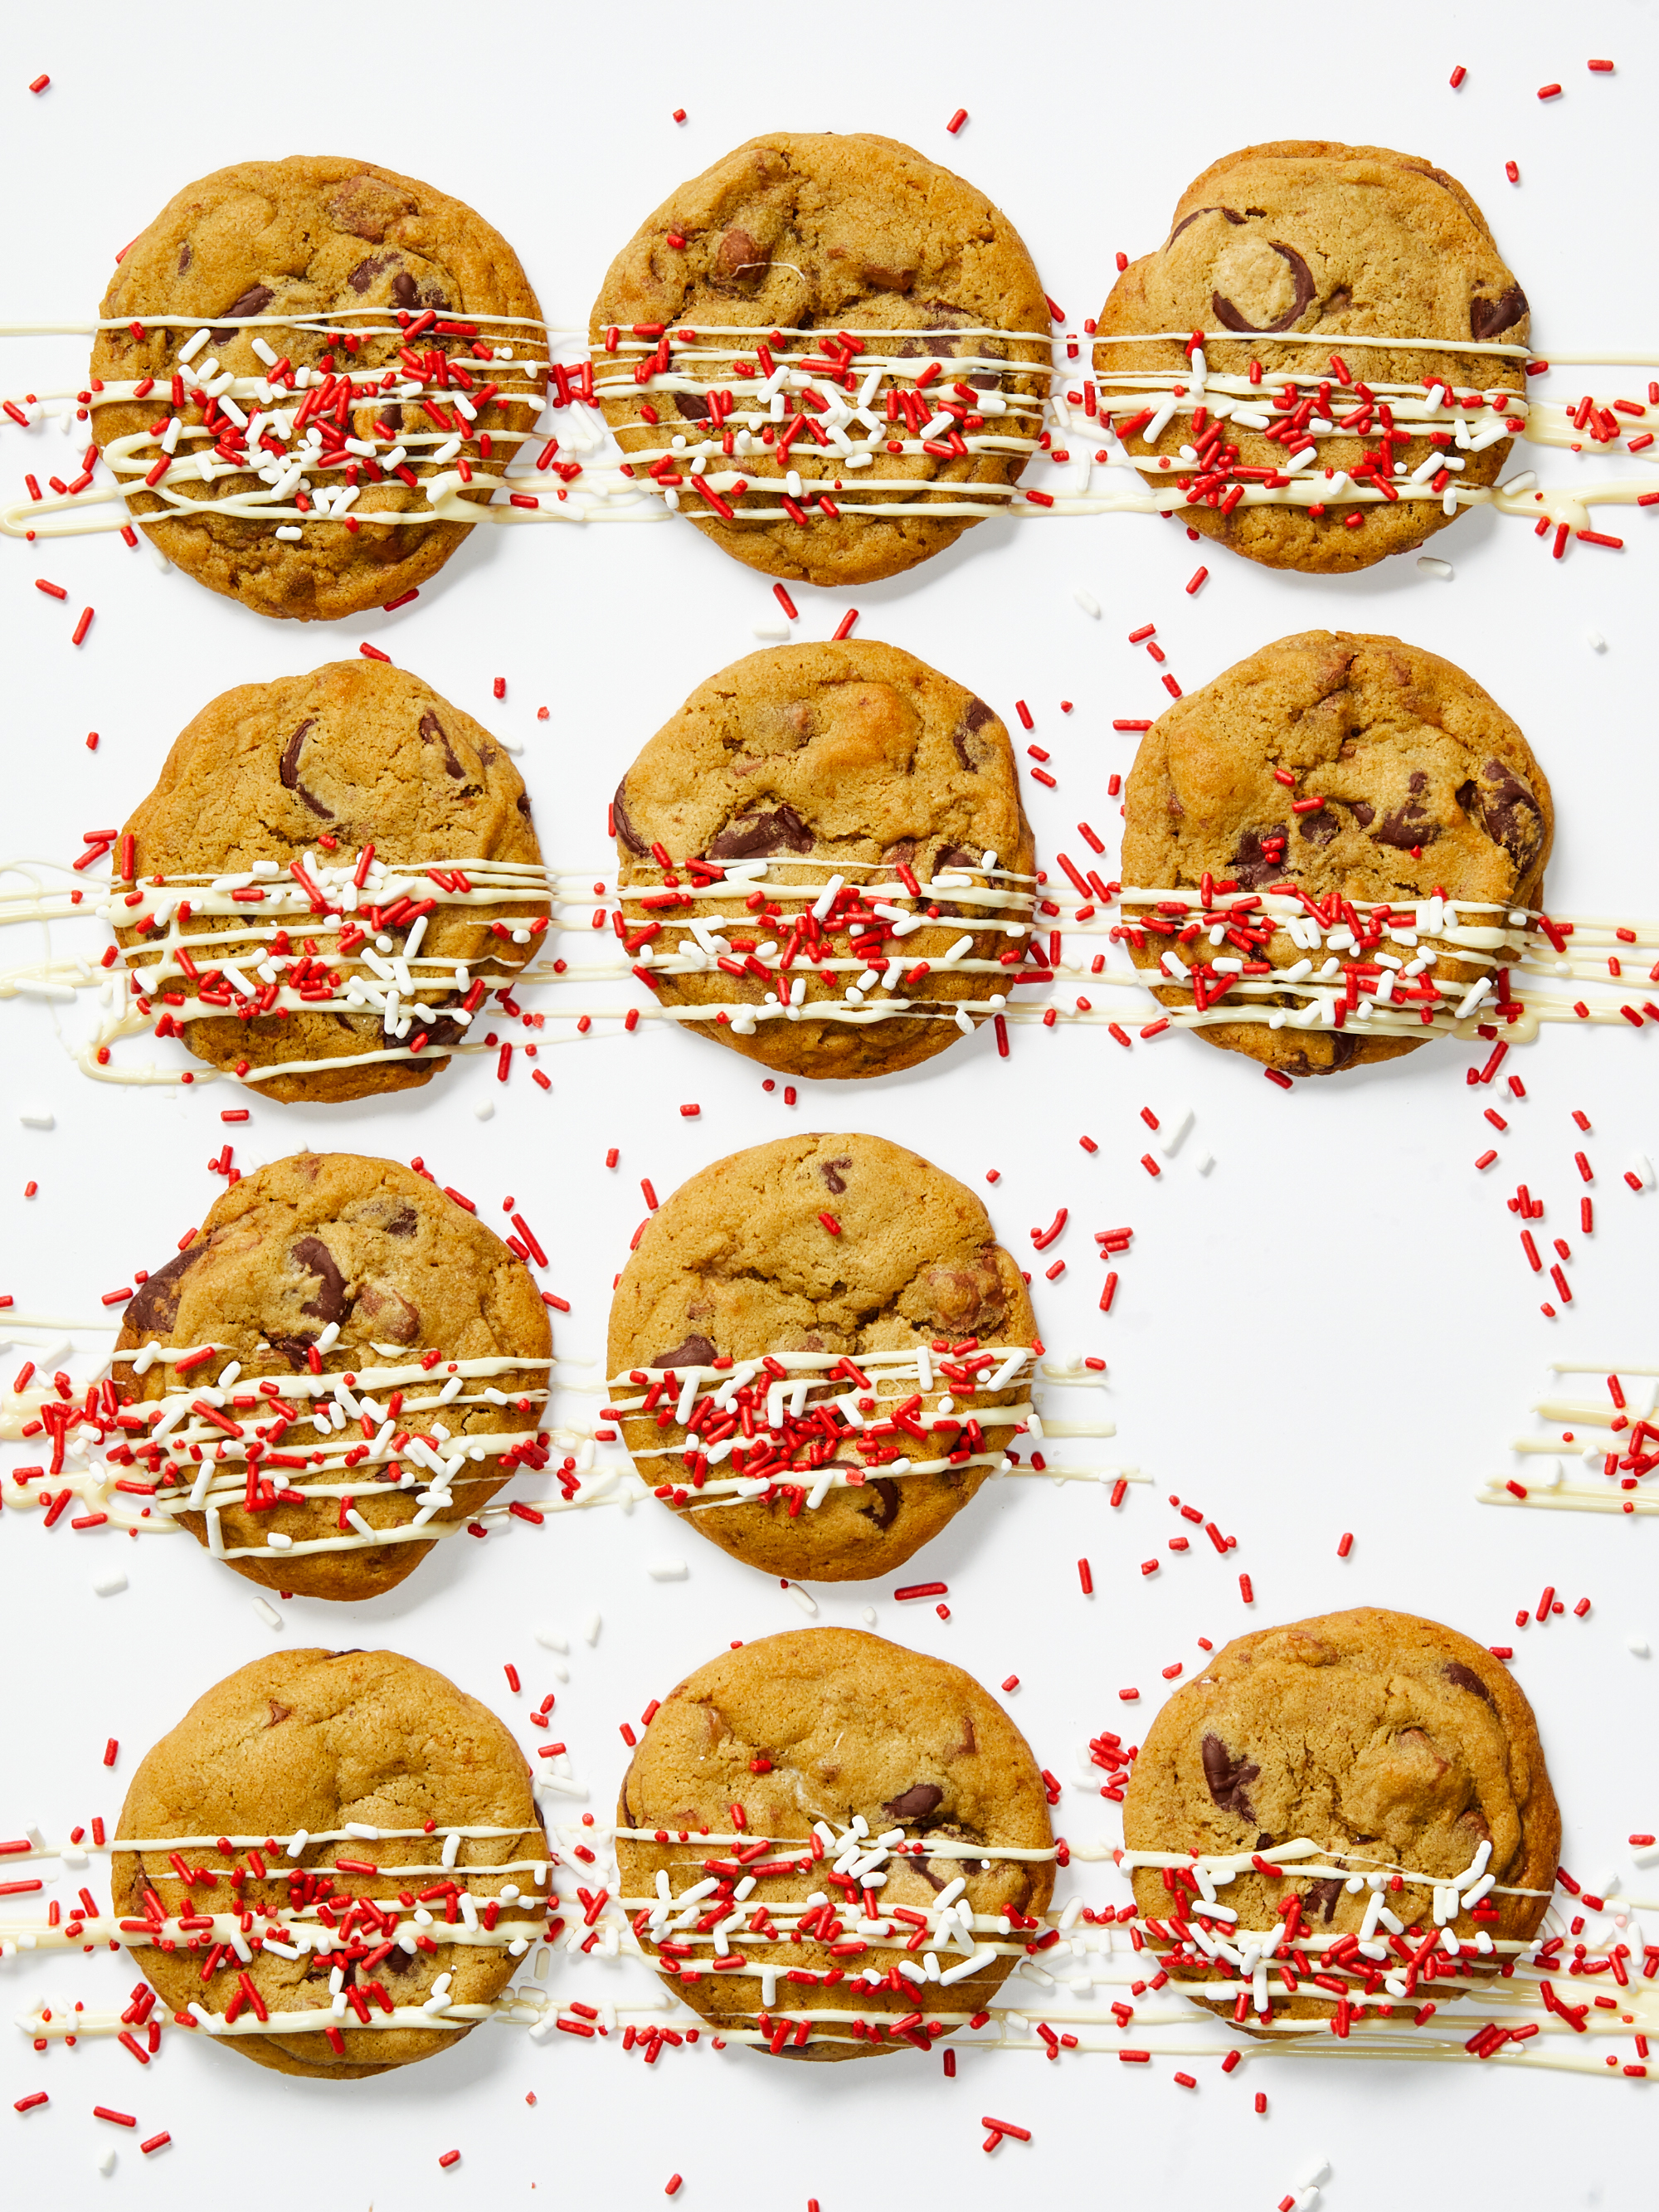 FNM1218_GROUP_SHOT_CHOCOLATE_CHIP_DRIZZLE_197.jpg